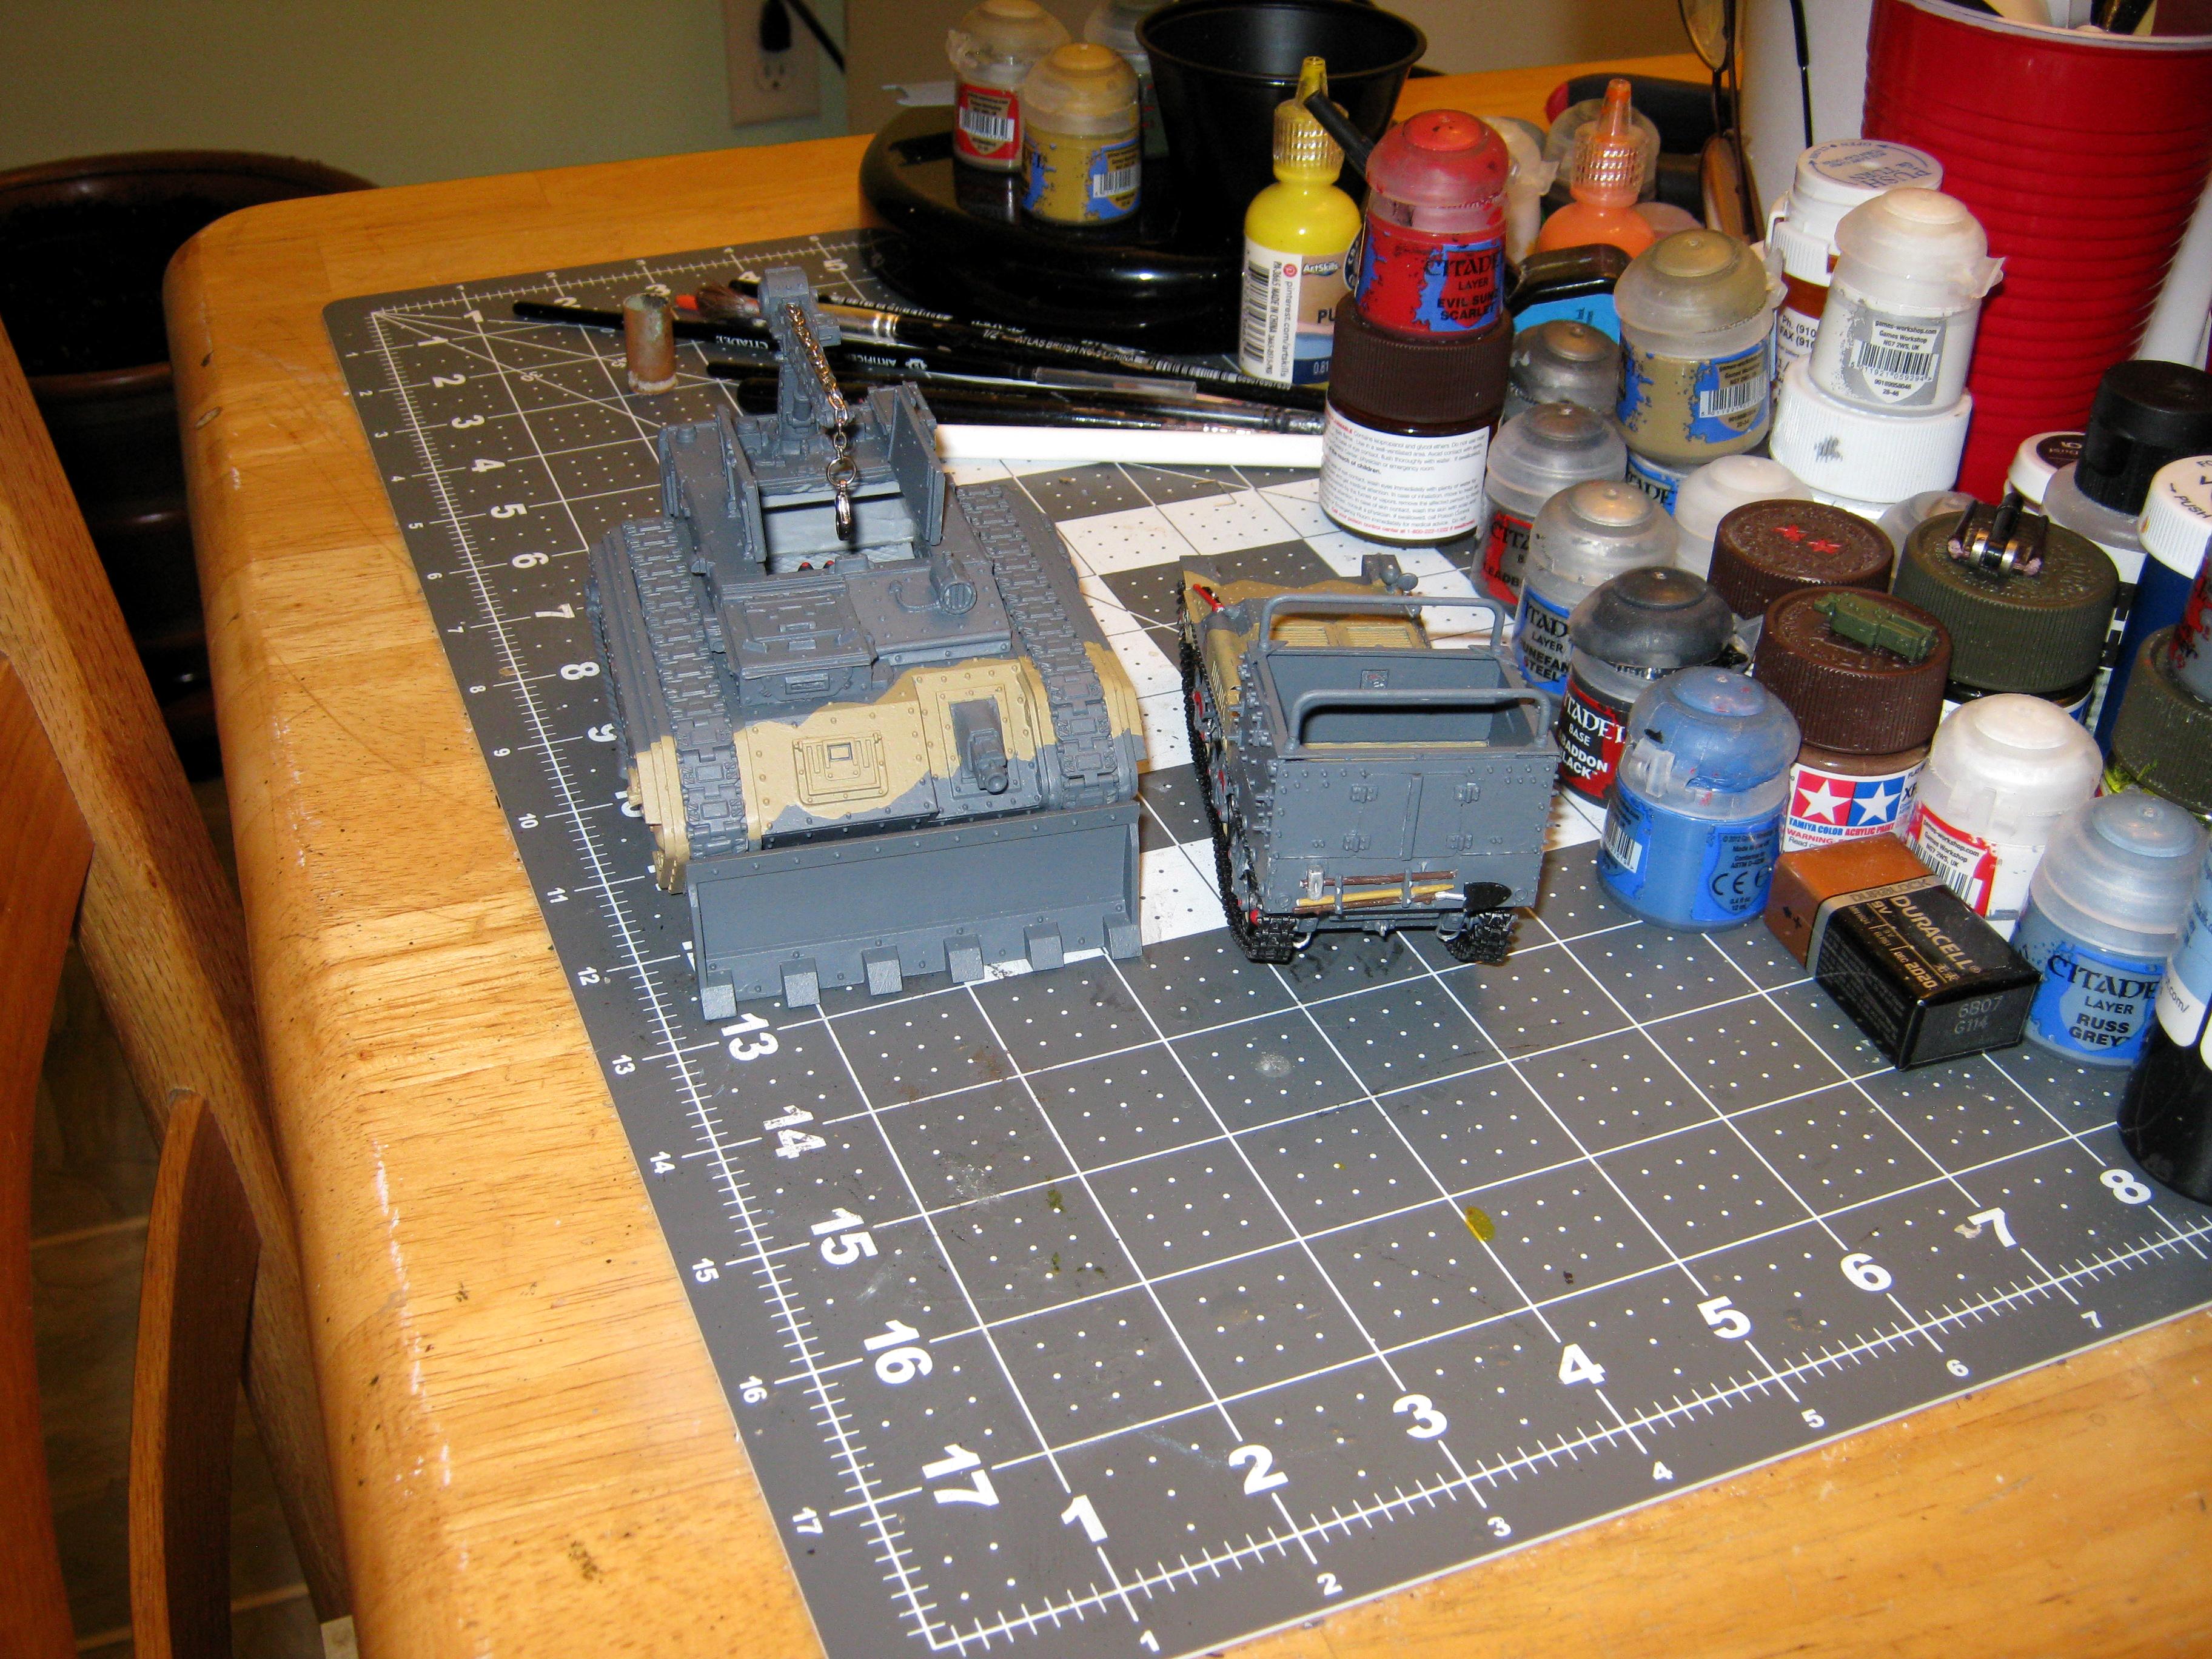 38l, Apc, Armored Transport, Artillery Tractor, Astra Militarum, Forge World, France, Imperial, Imperial Guard, Logistical Unit, Lorraine, Munitions Carrier, Support Vehicle, Trojan Support Vehicle, World War 2